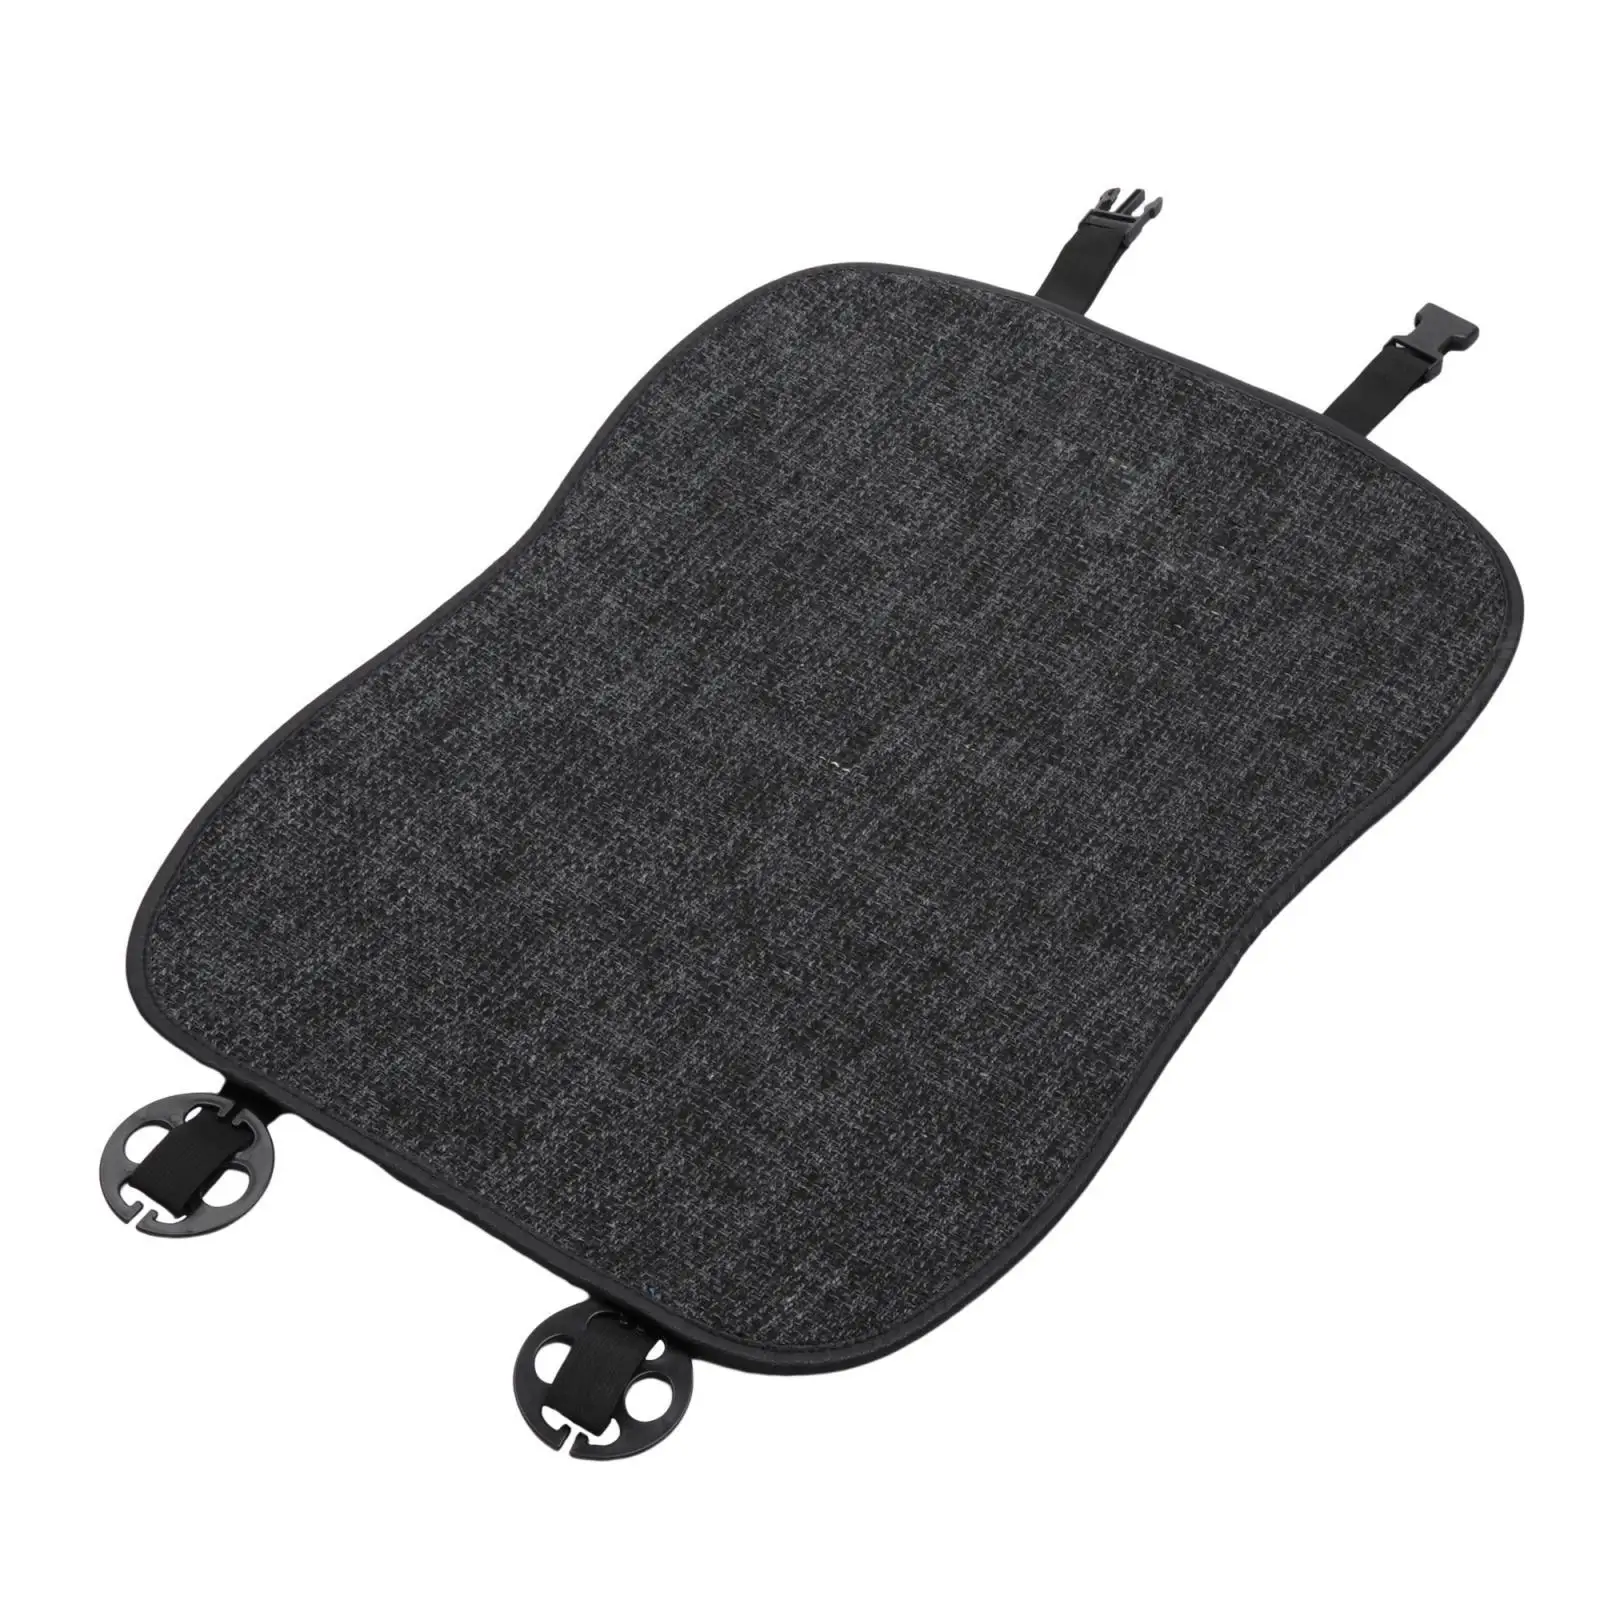 Car Seat Protectors Cover for Byd Atto Seasons Used Anti Slip